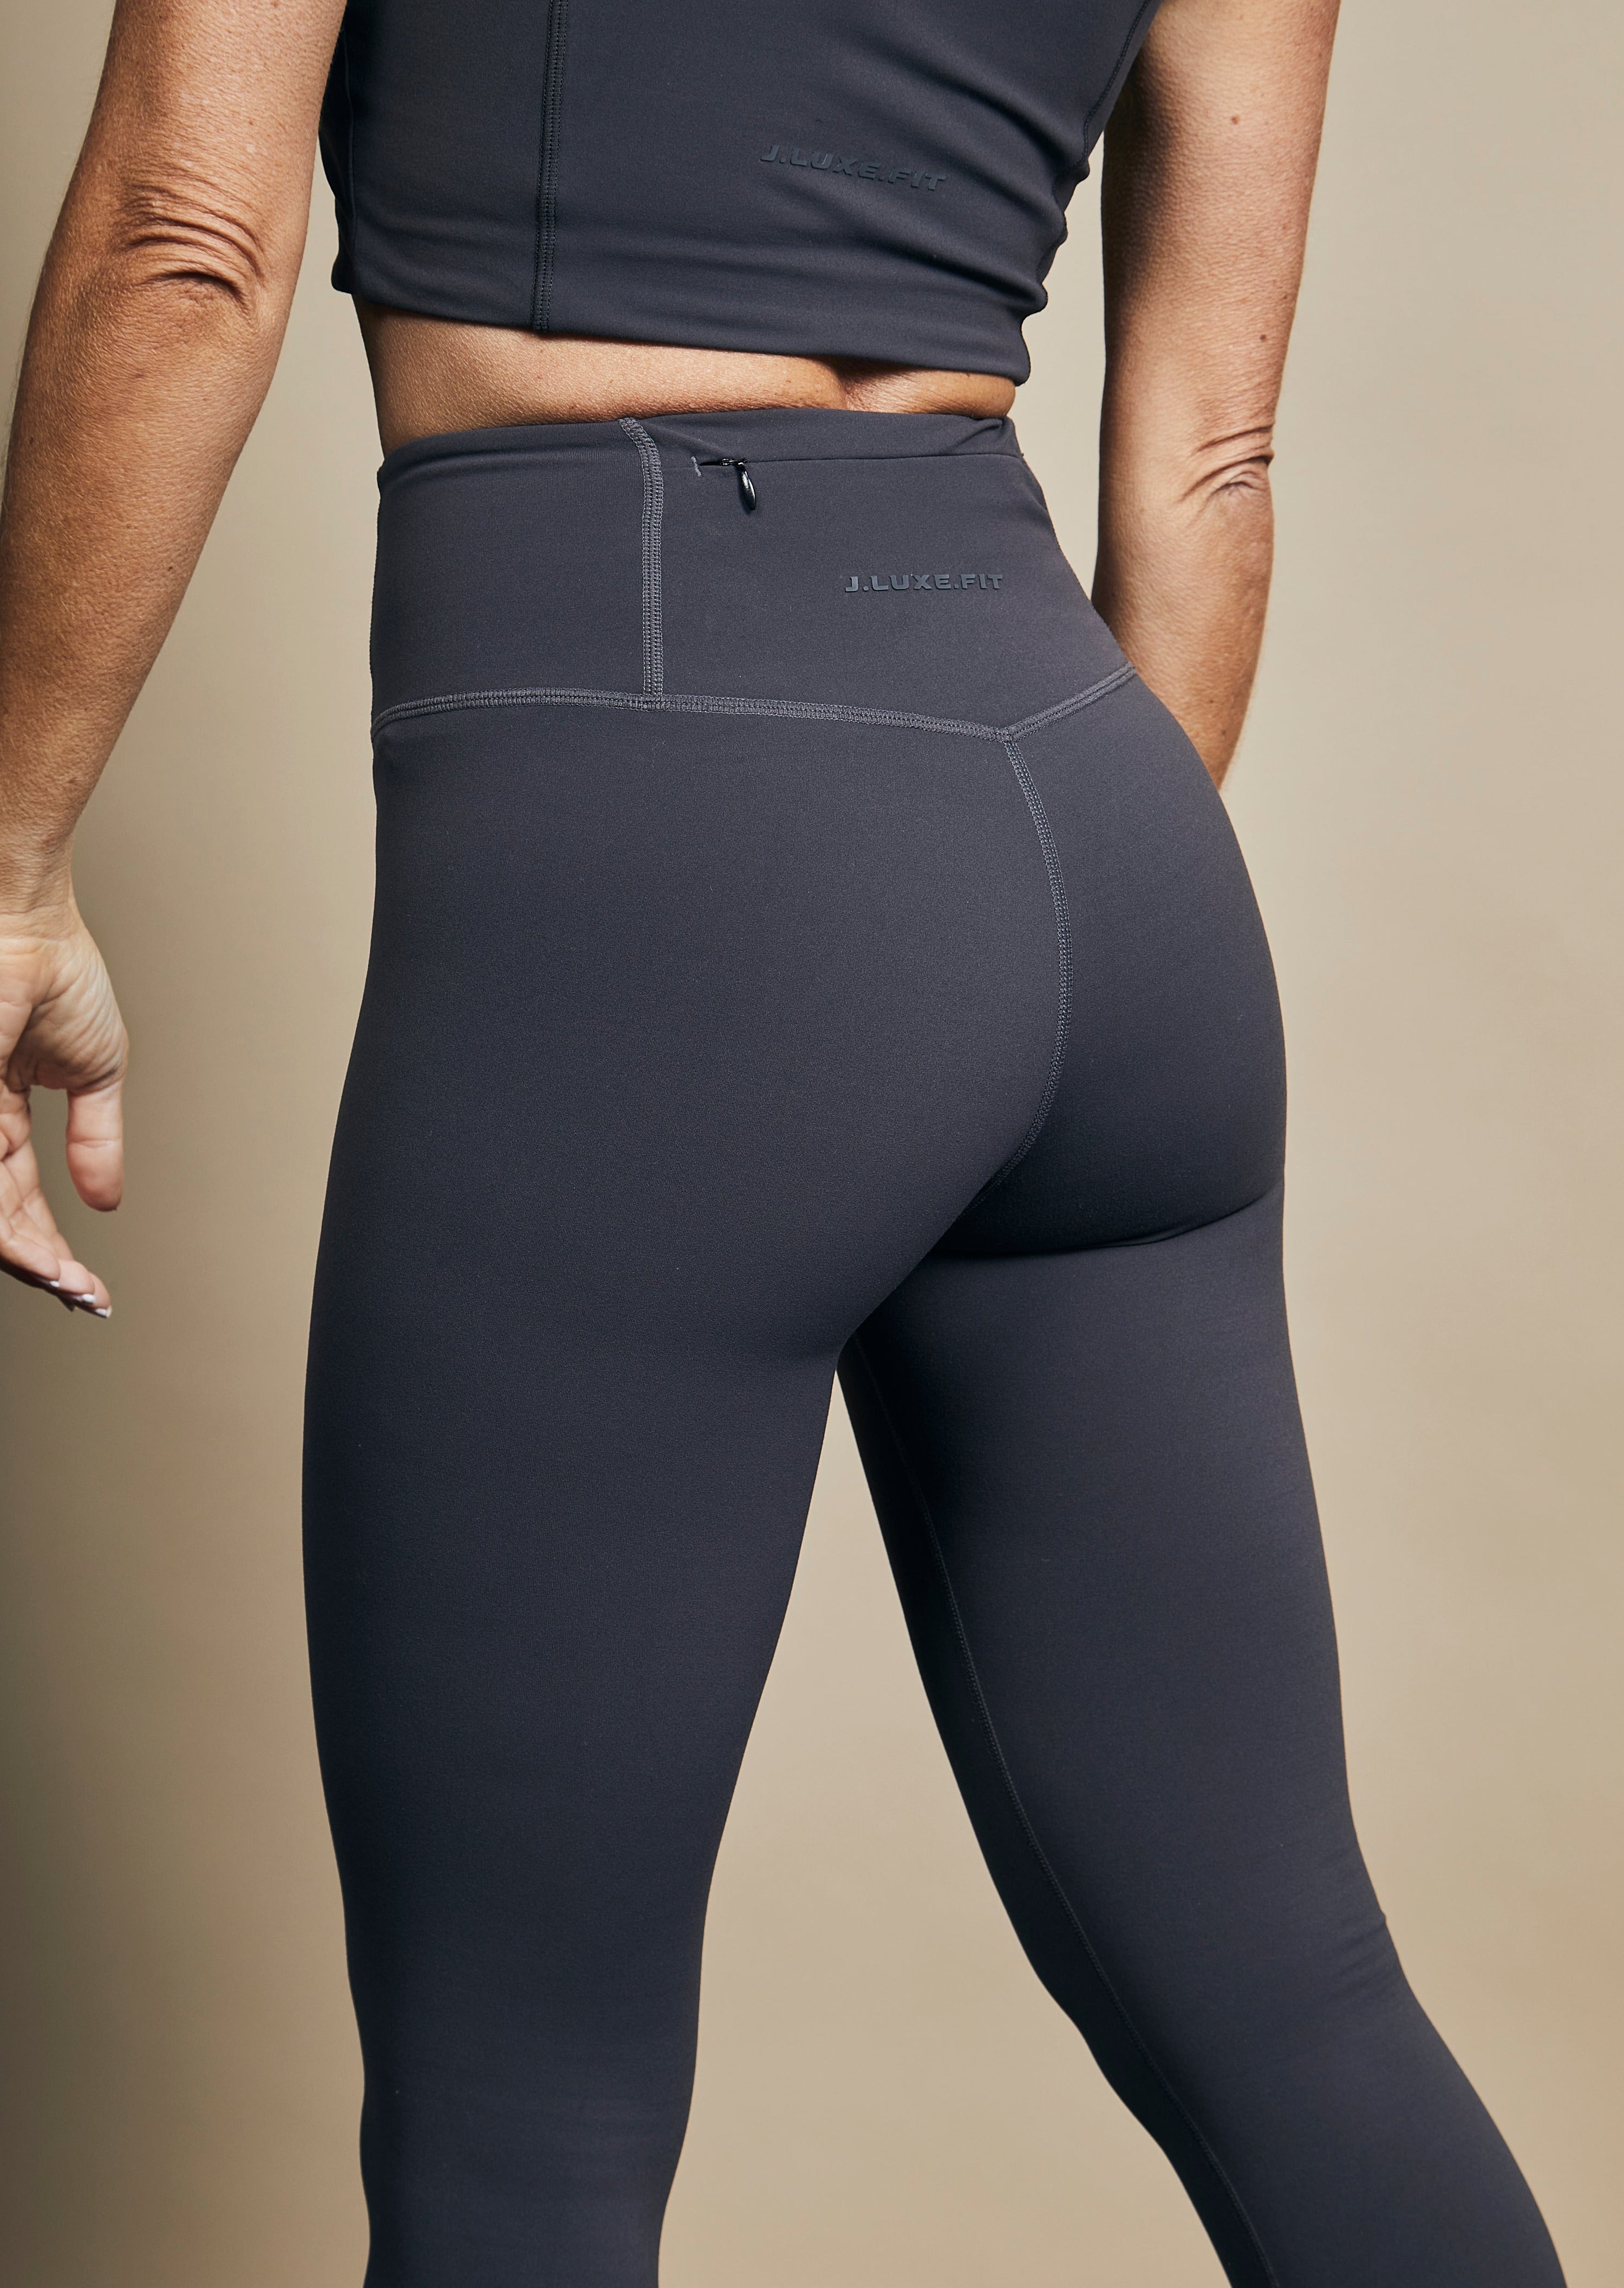 Limited Edition! Pocket Leggings - Butter soft Sunset – gaiaecowear